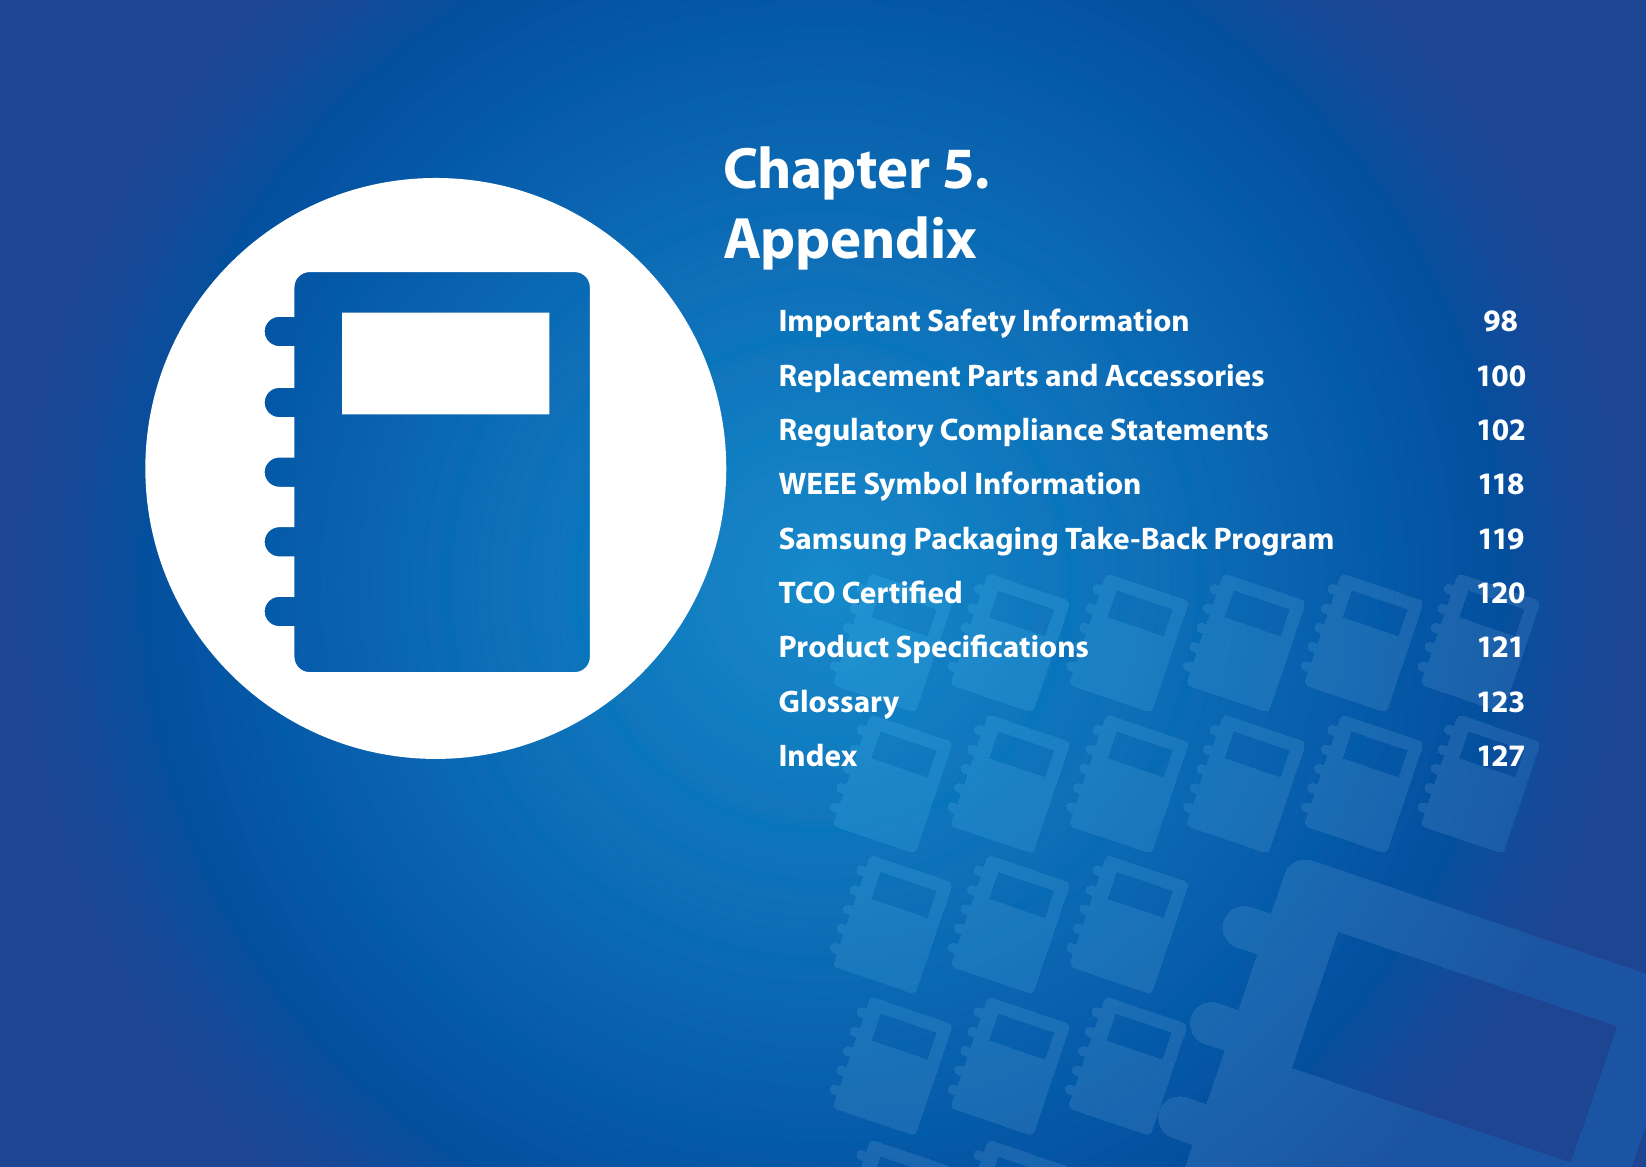 Chapter 5. AppendixImportant Safety Information  98Replacement Parts and Accessories  100Regulatory Compliance Statements  102WEEE Symbol Information  118Samsung Packaging Take-Back Program  119TCO Certied  120Product Specications  121Glossary 123Index 127